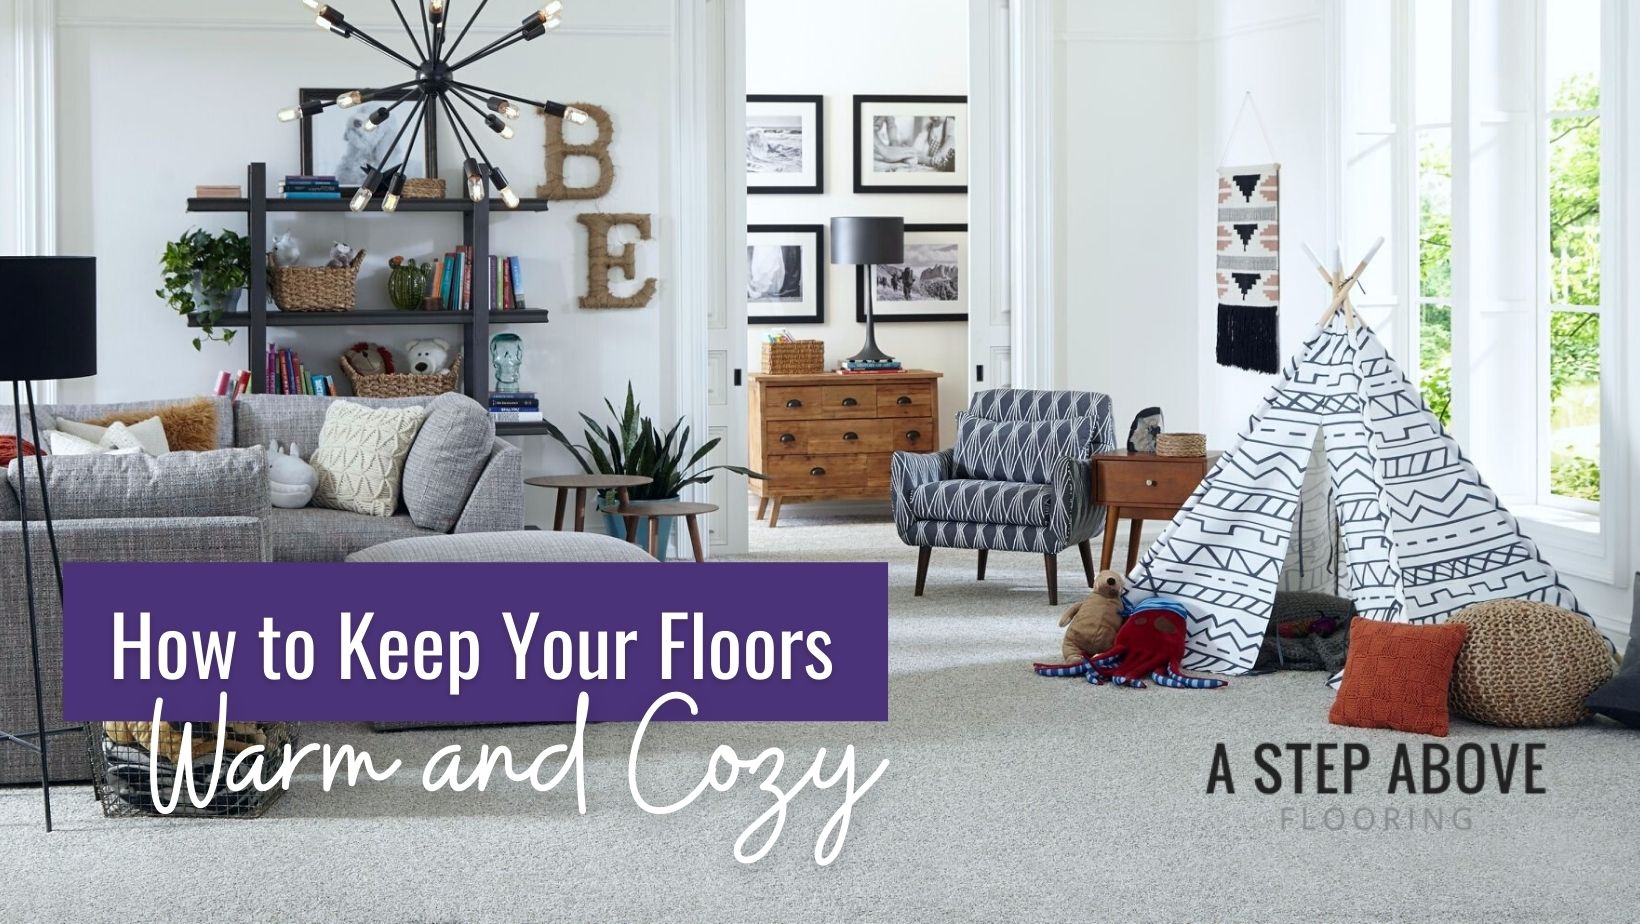 Carpet to keep your floors warm and cozy